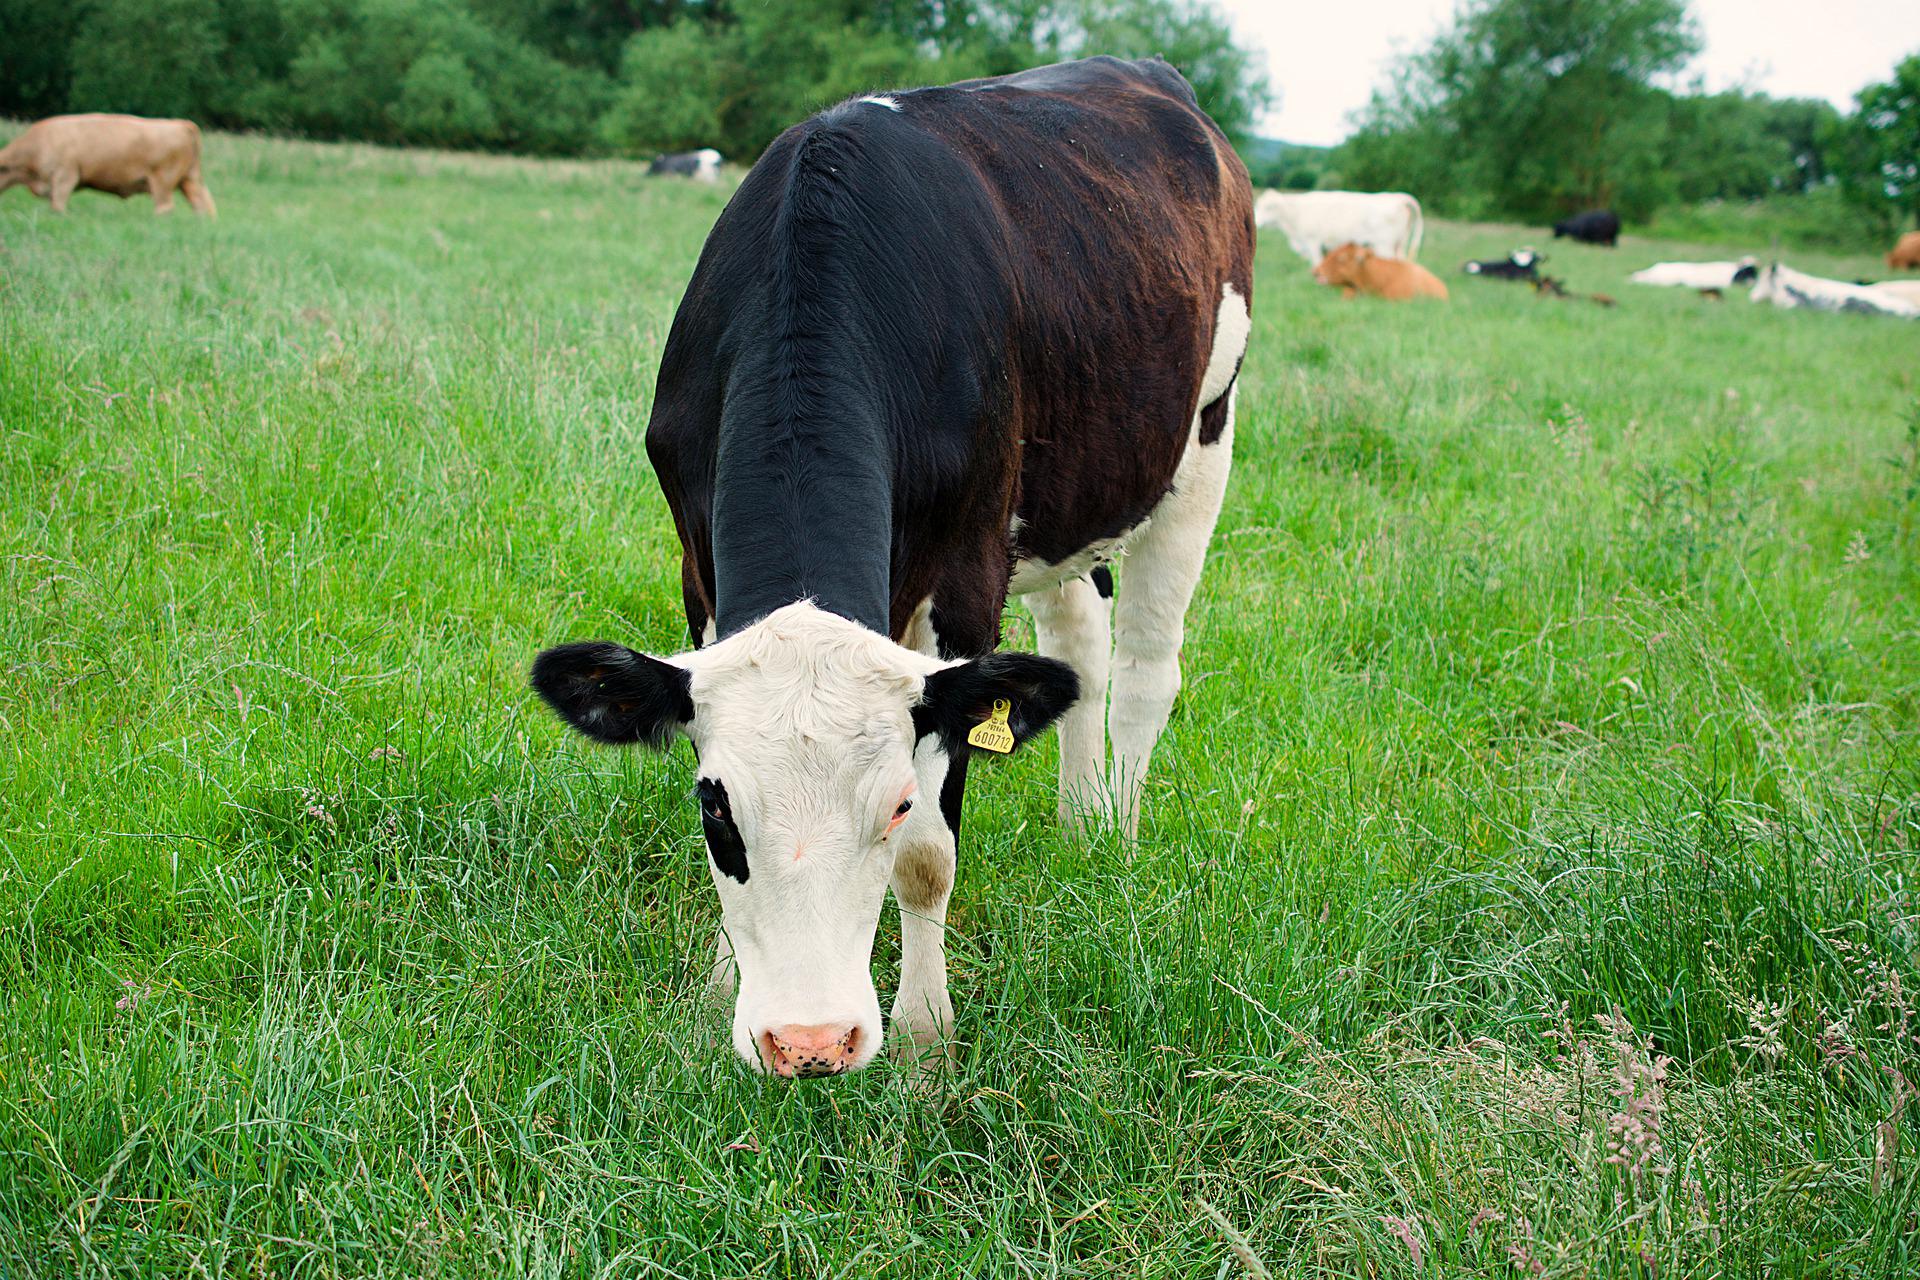 A dairy cow in a field.